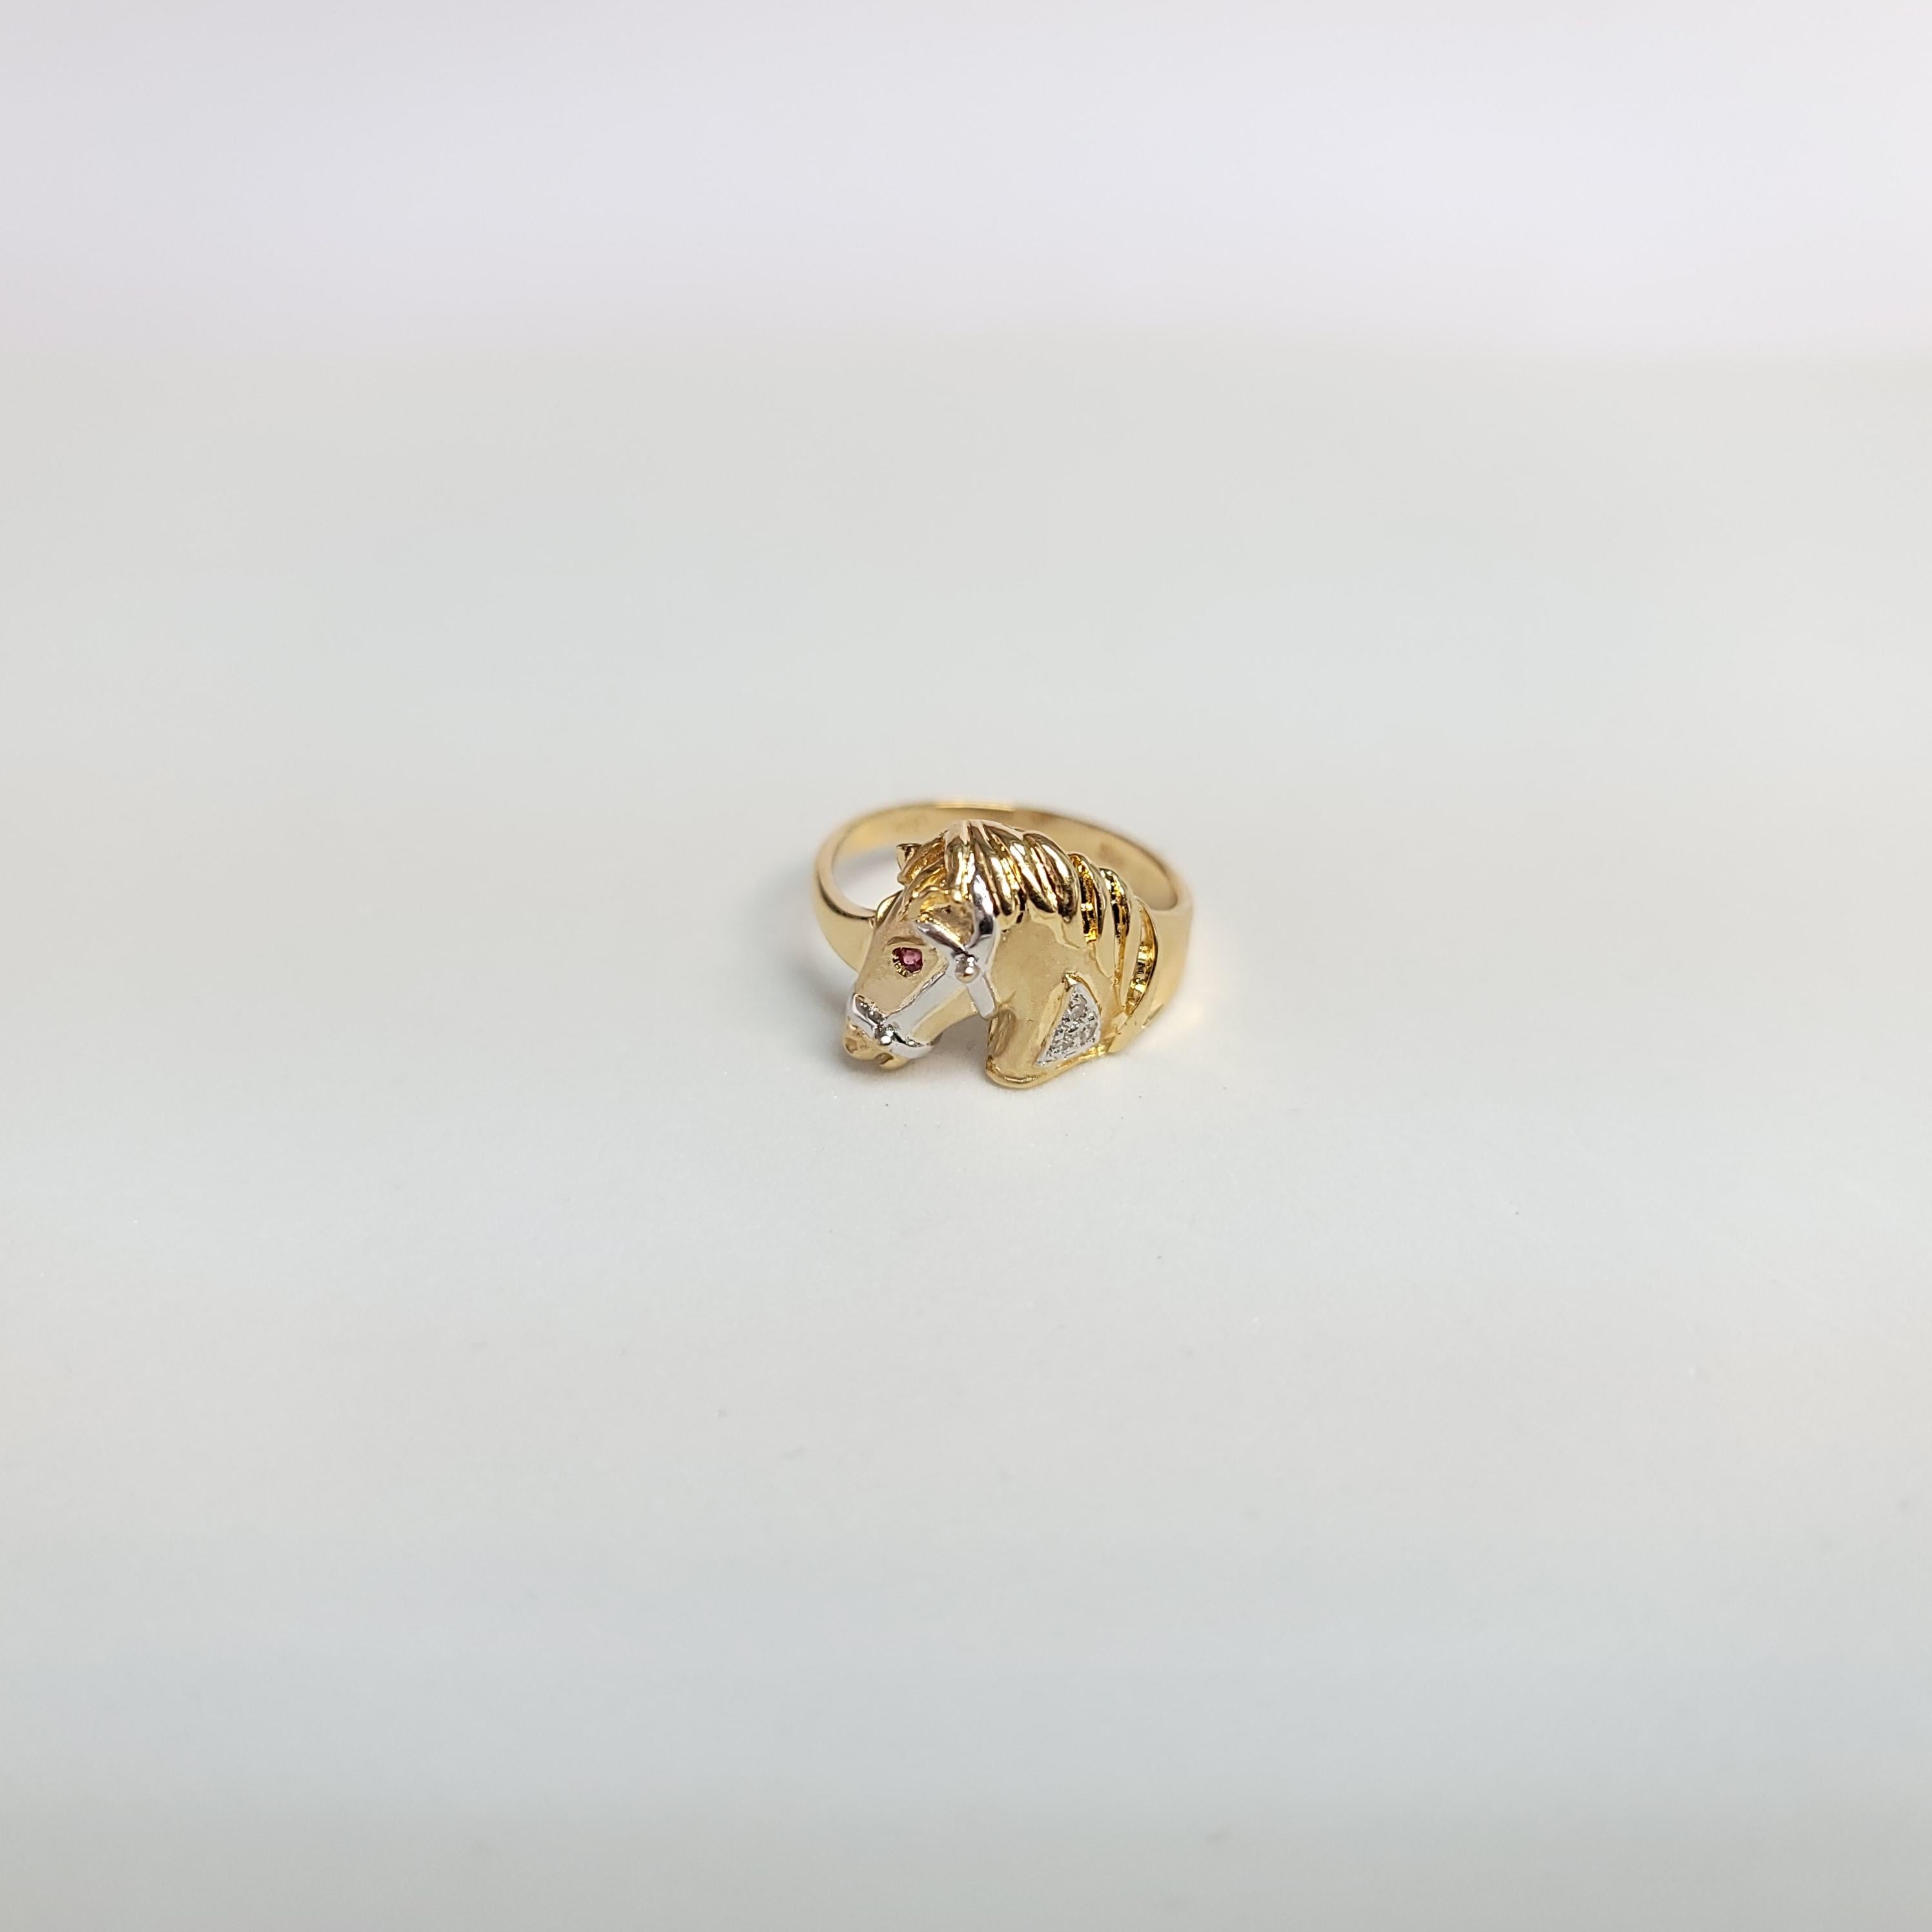 Ruby & Diamond Accented Horsehead Matte Ring 14k Yellow Gold In New Condition For Sale In Sugar Land, TX